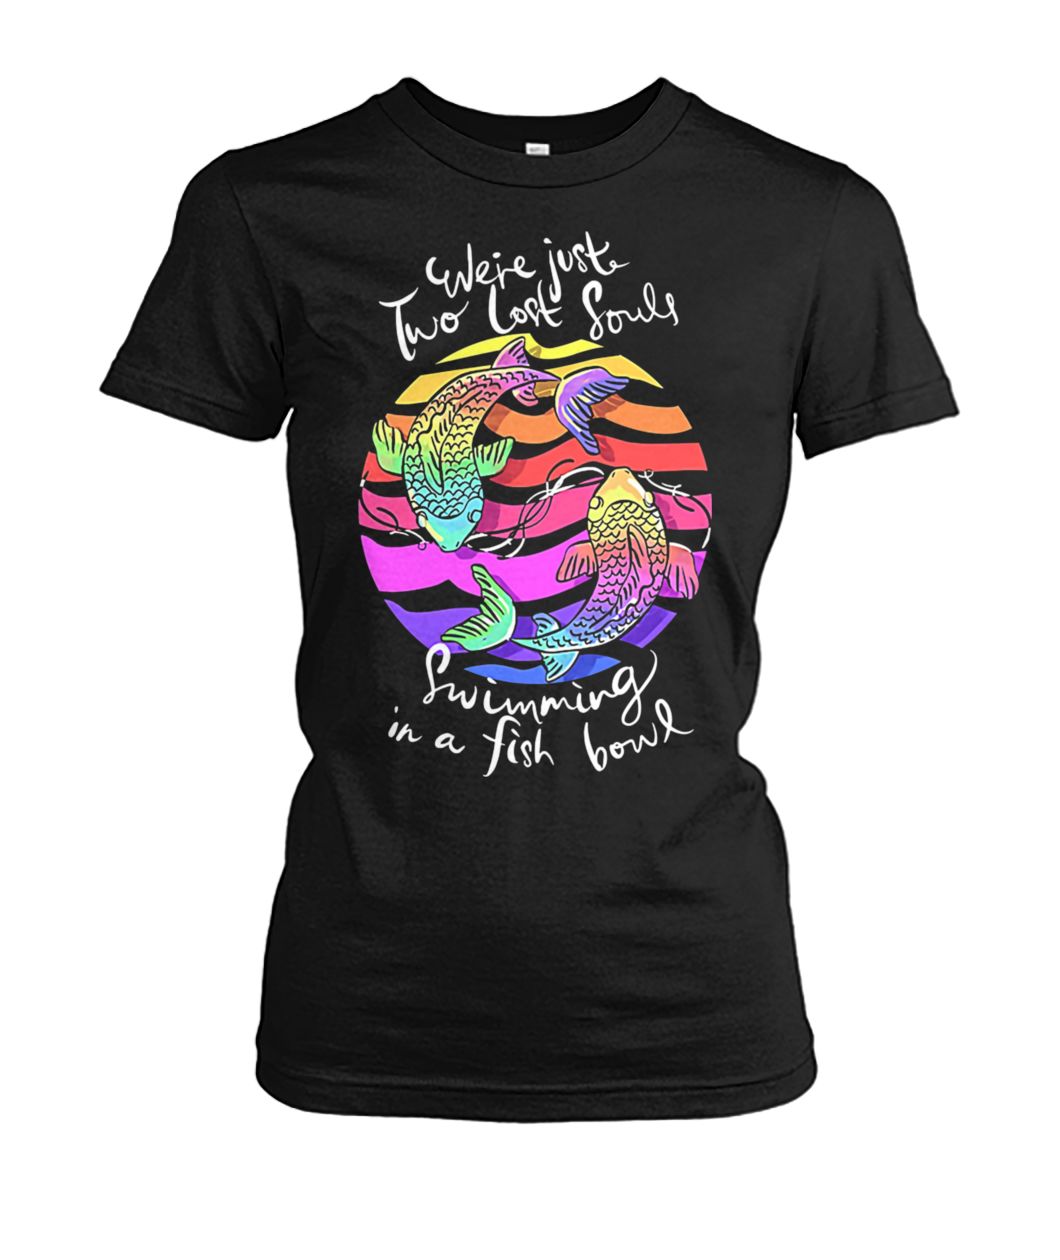 We're just two lost souls swimming in a fish bowl women's crew tee